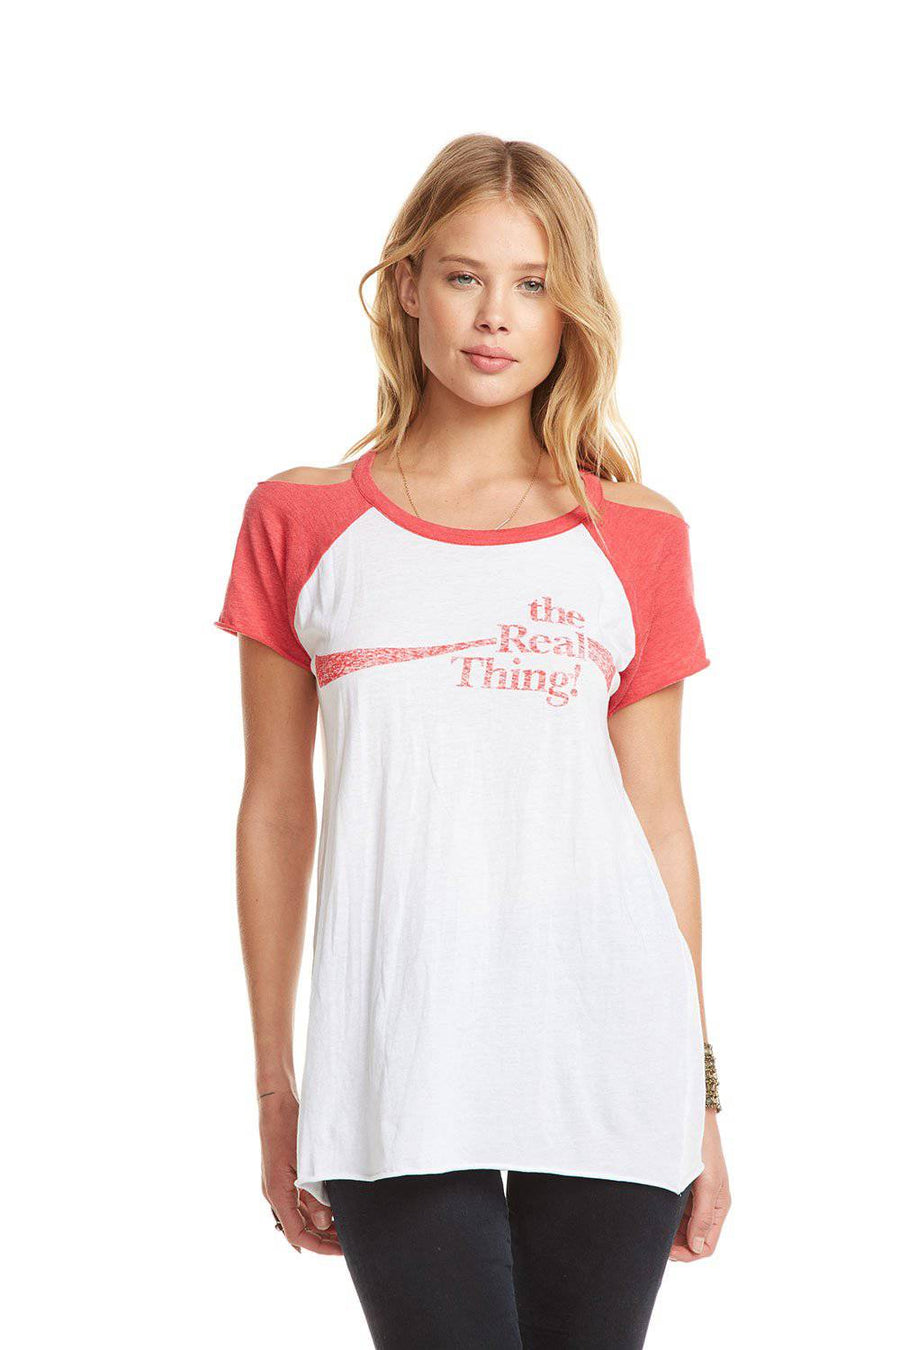 COCA COLA - THE REAL THING WOMENS chaserbrand